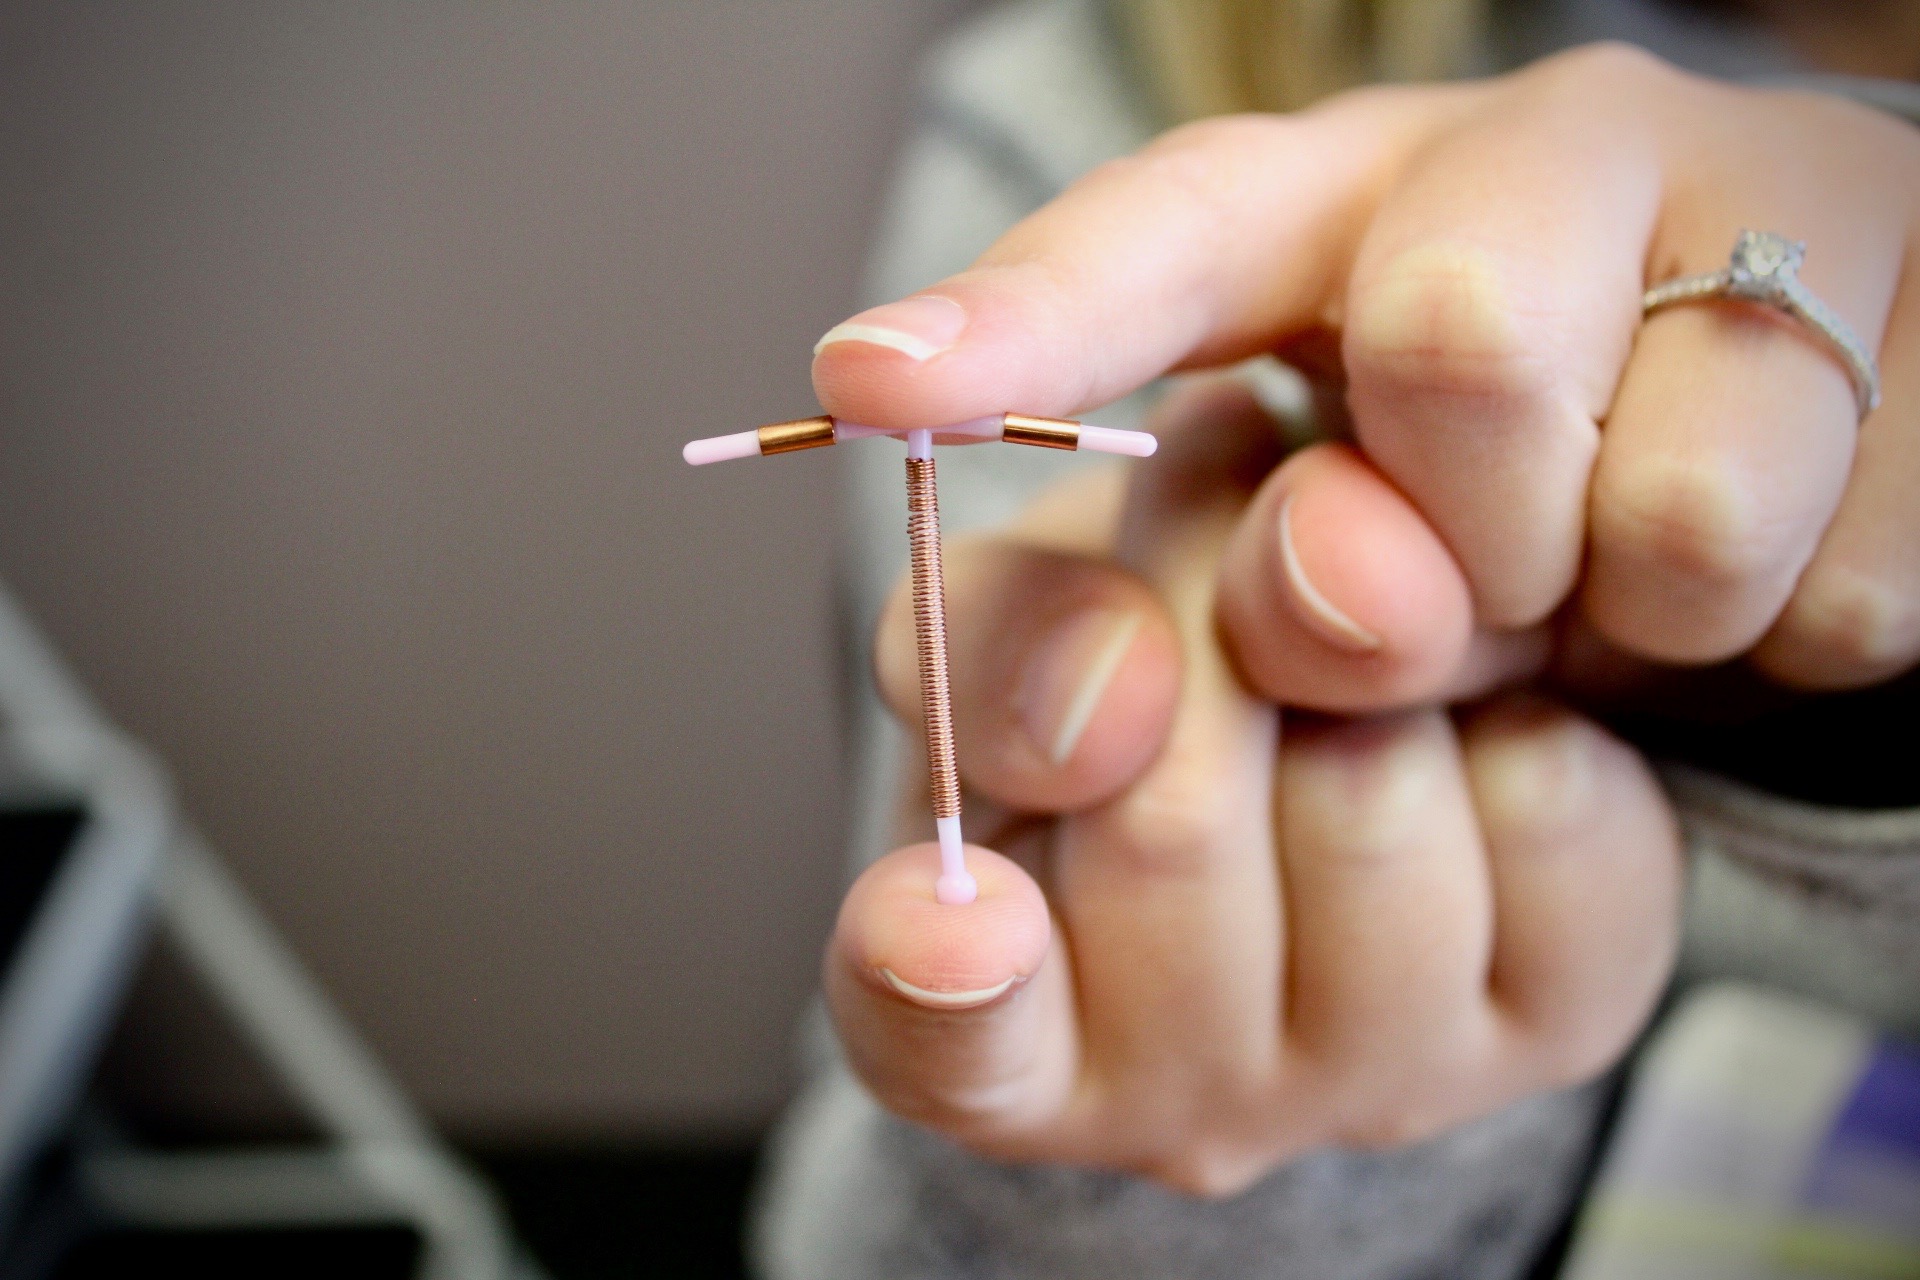 Minor side effects of IUD removal